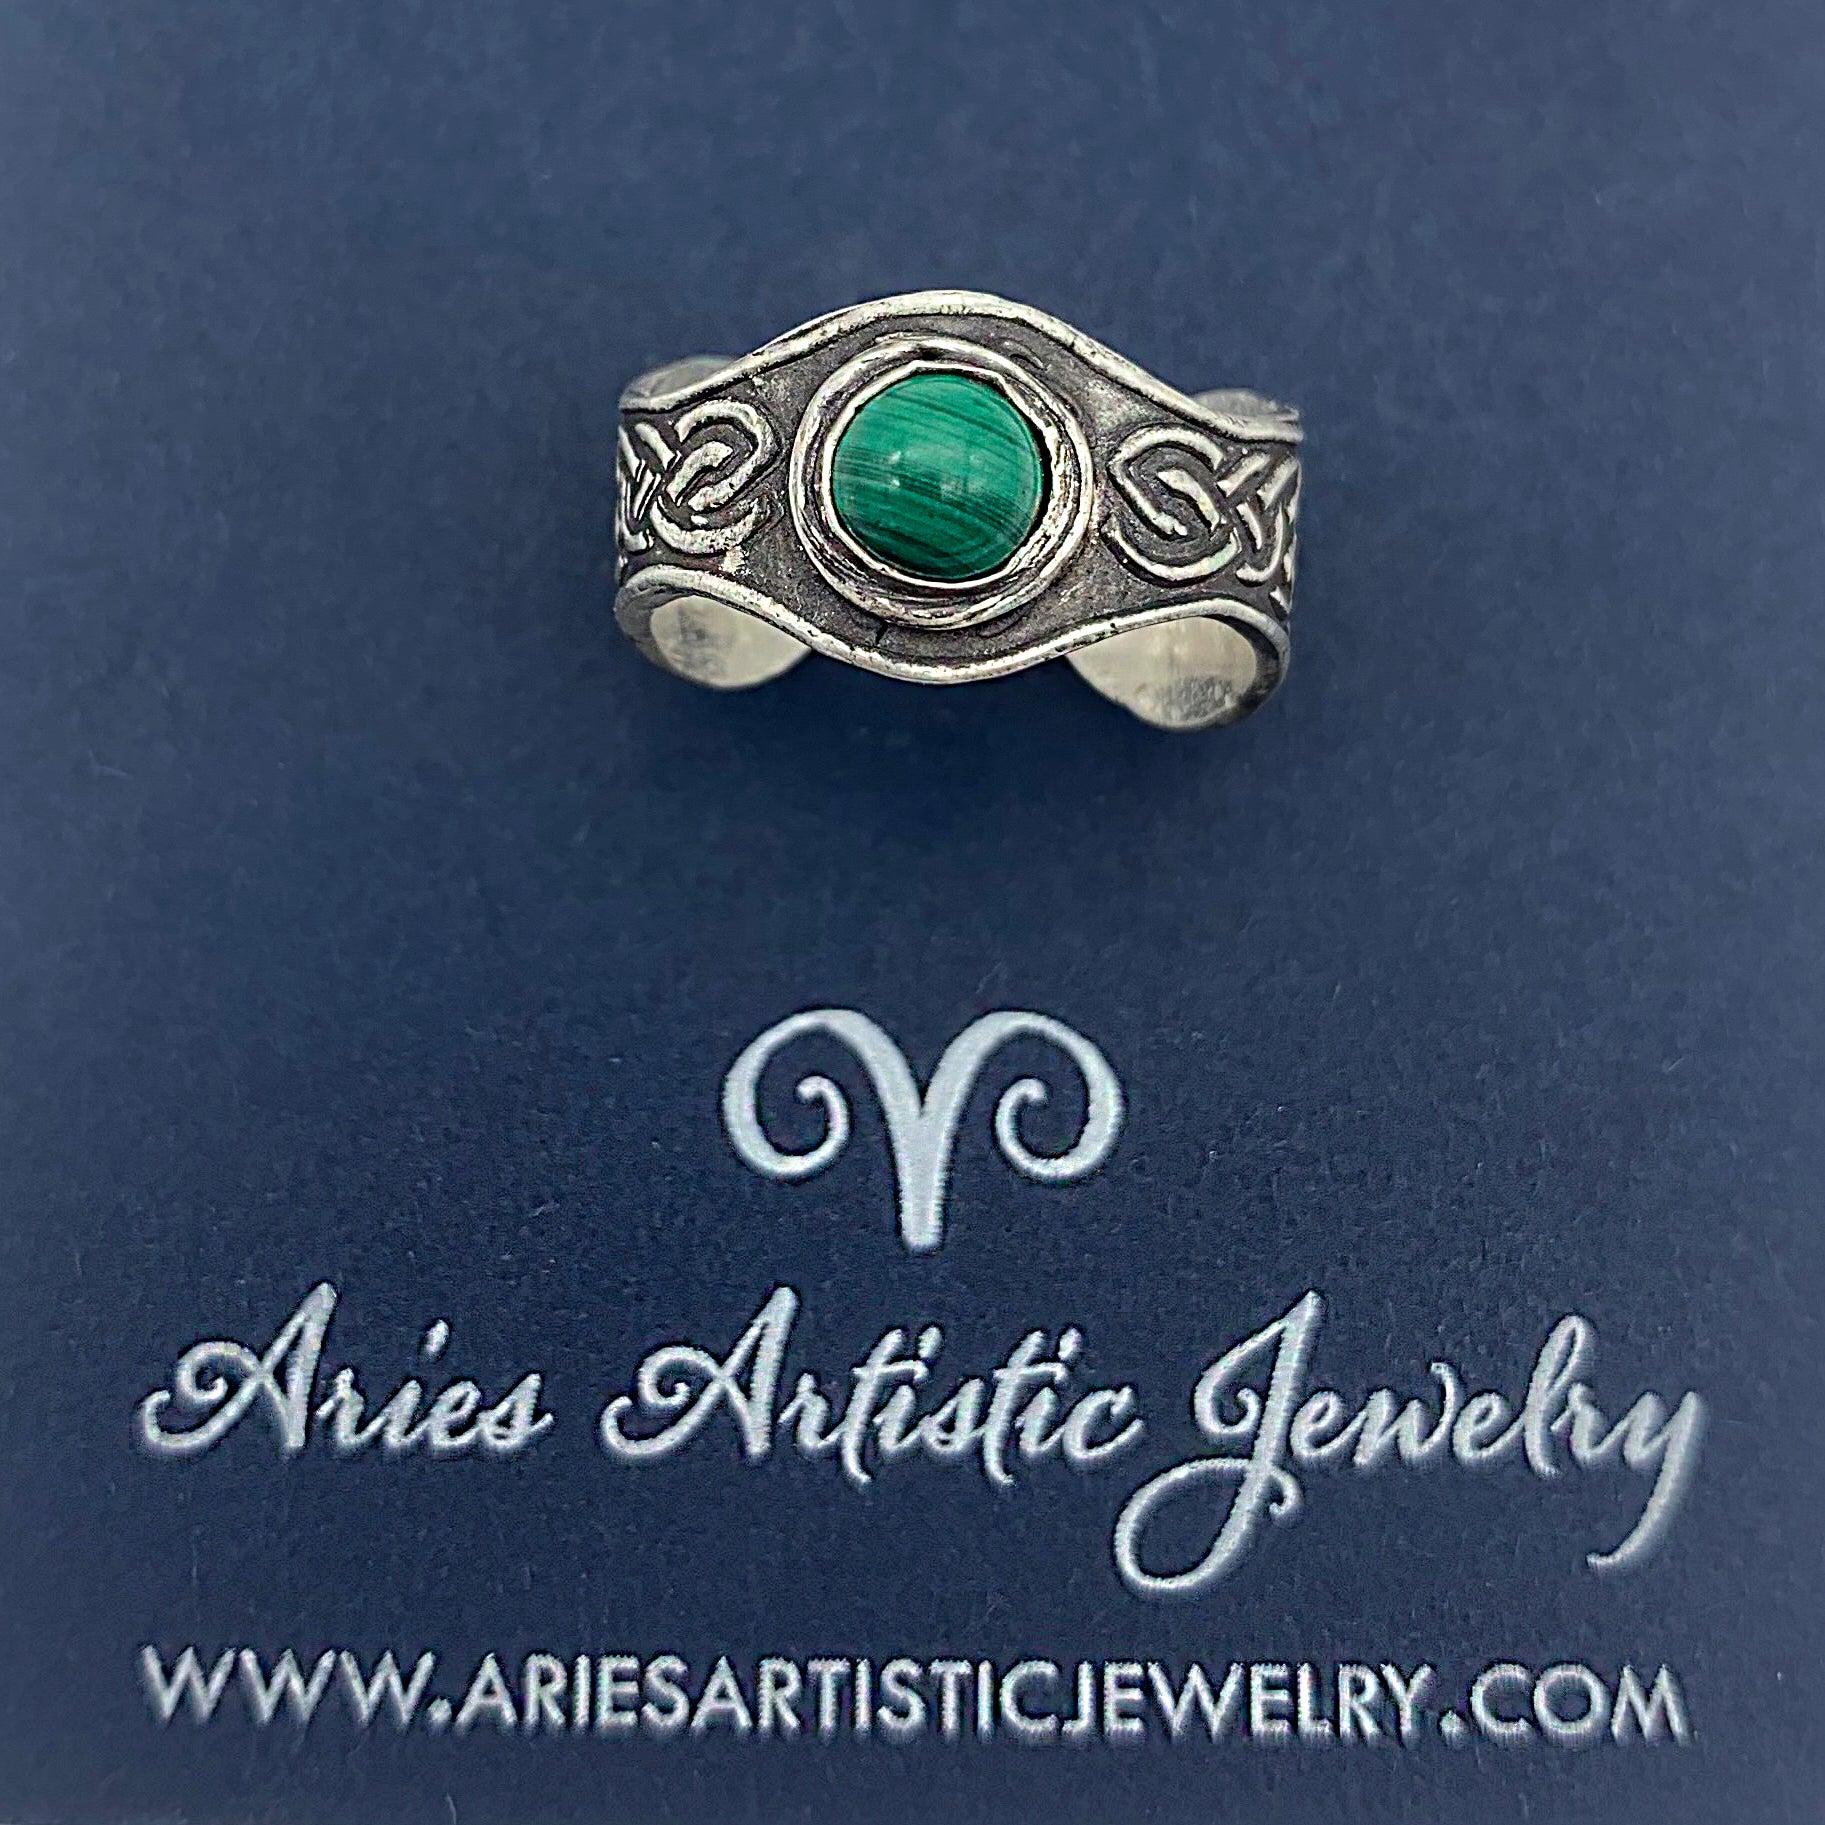 Adjustable Sterling Silver Celtic Ring with Malachite Gemstone